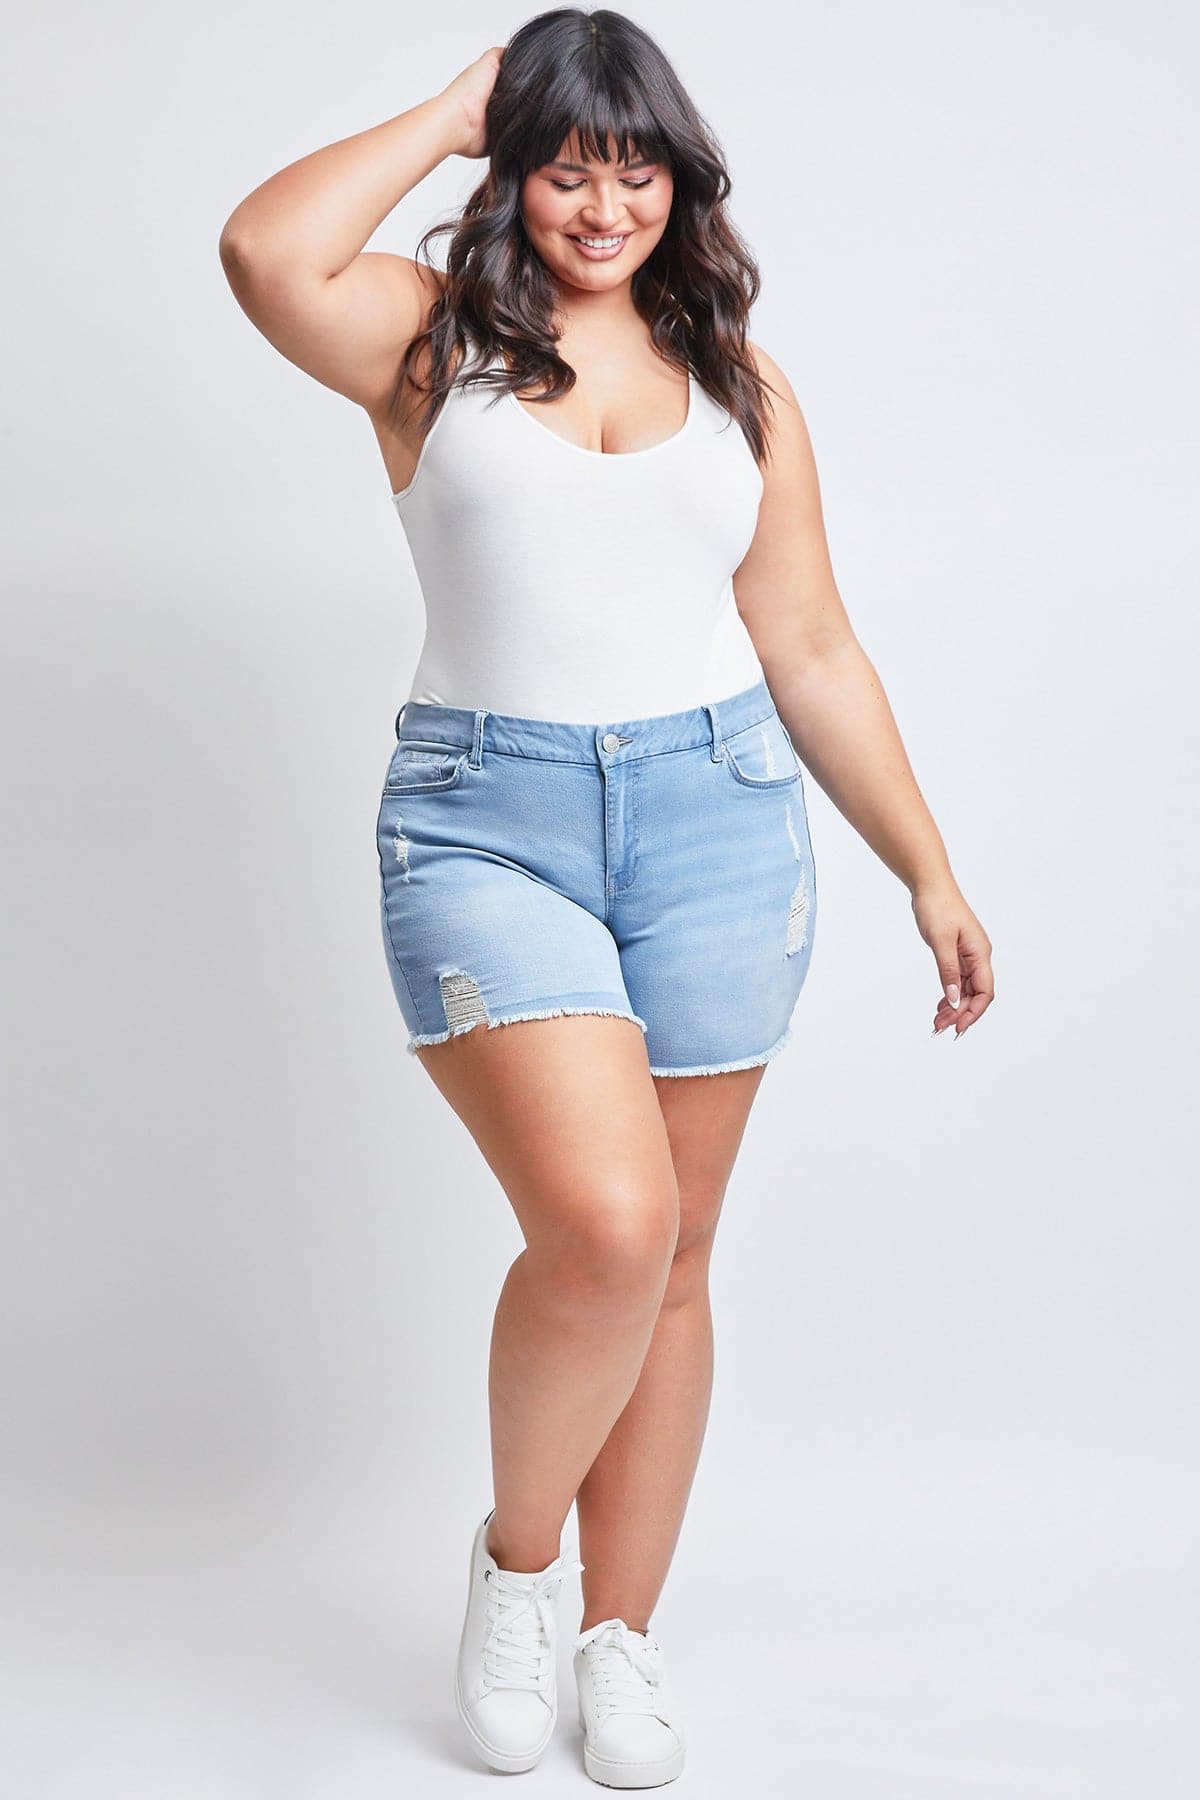 Plus Size Women's Curvy Fit Jeans Shorts With Fray Hem from YMI – YMI JEANS